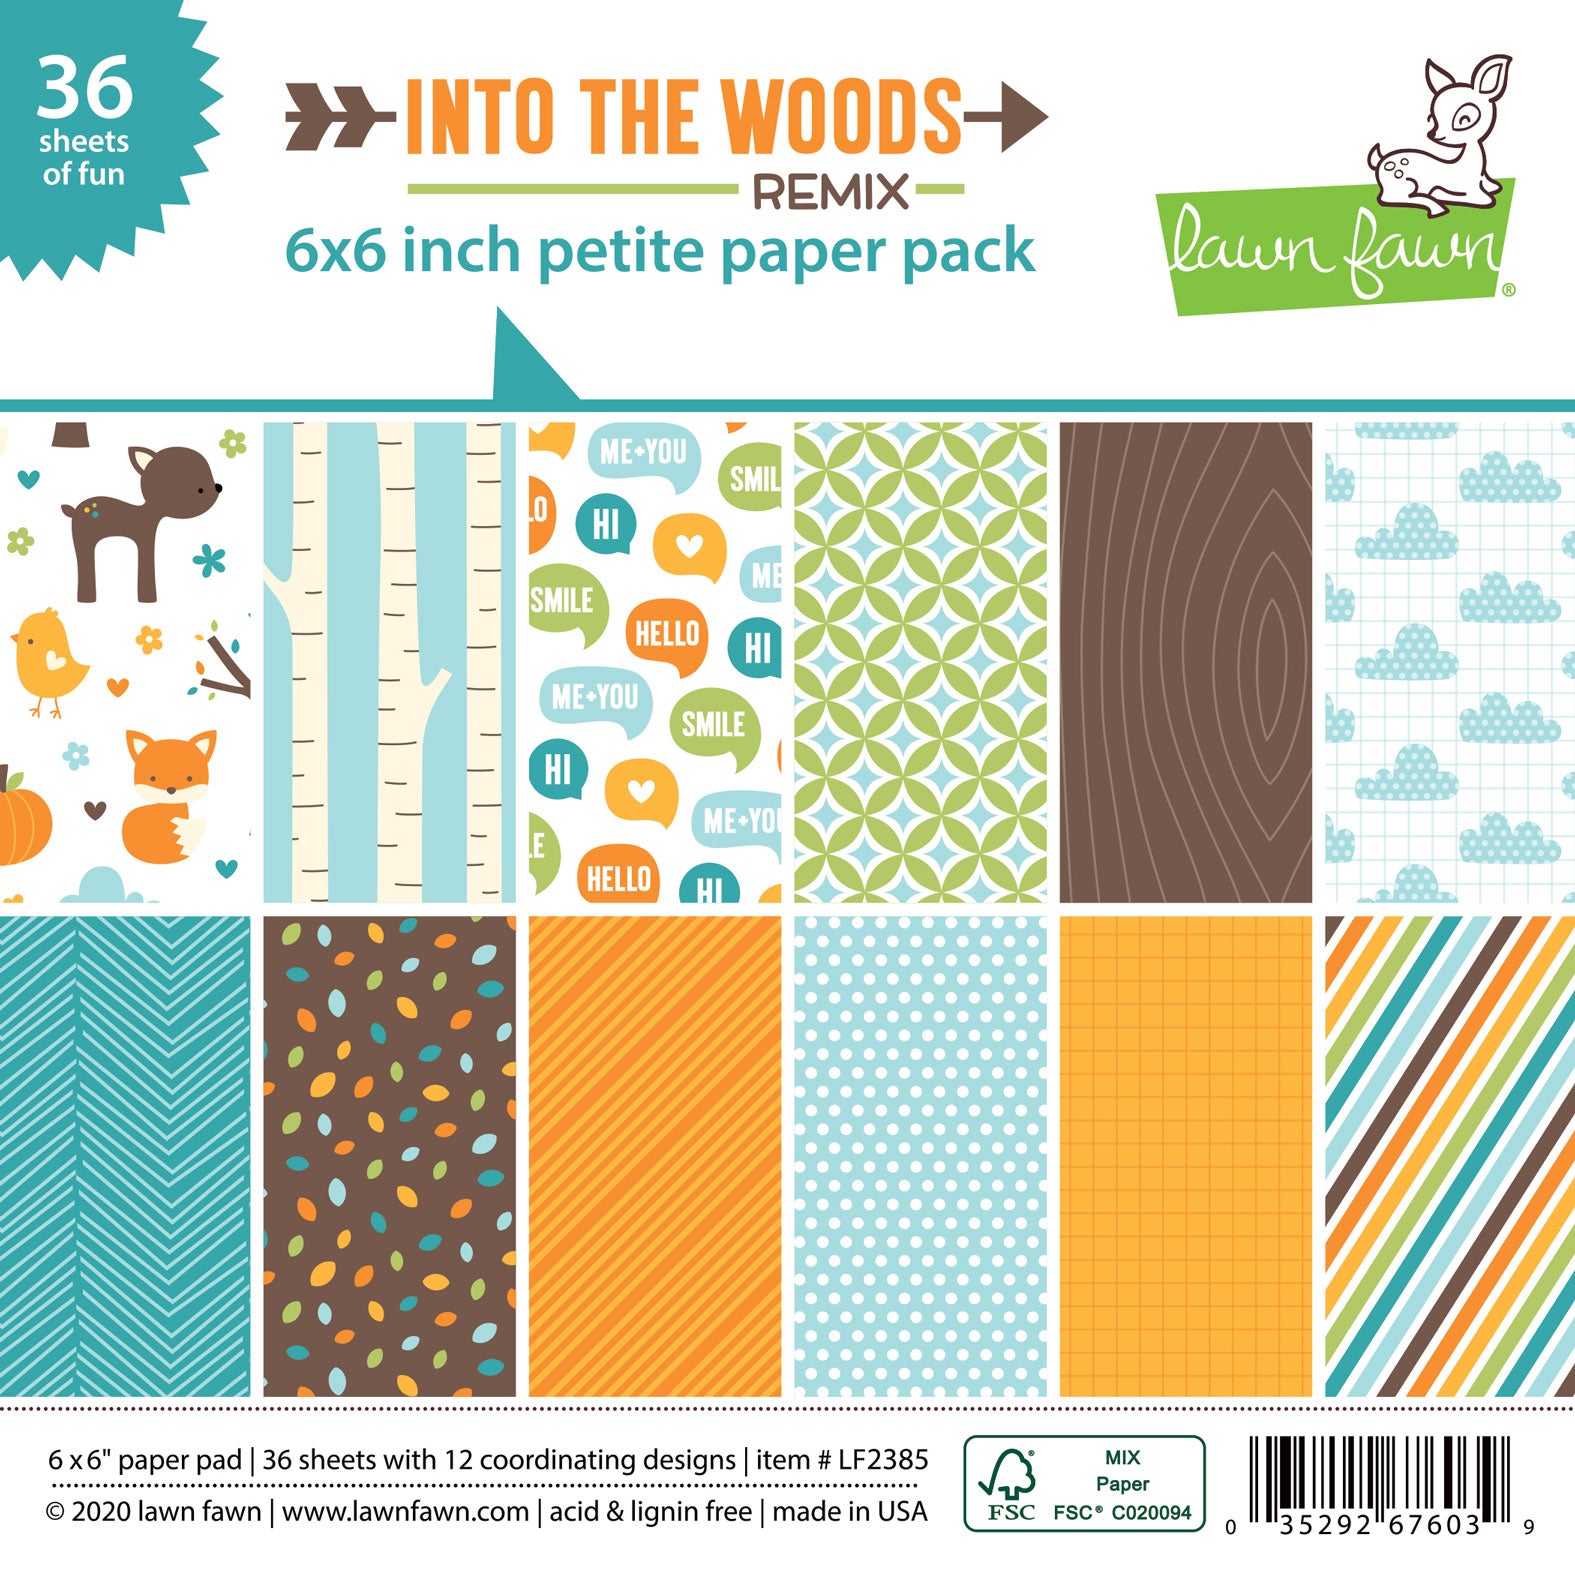 into the woods remix - petite paper pack